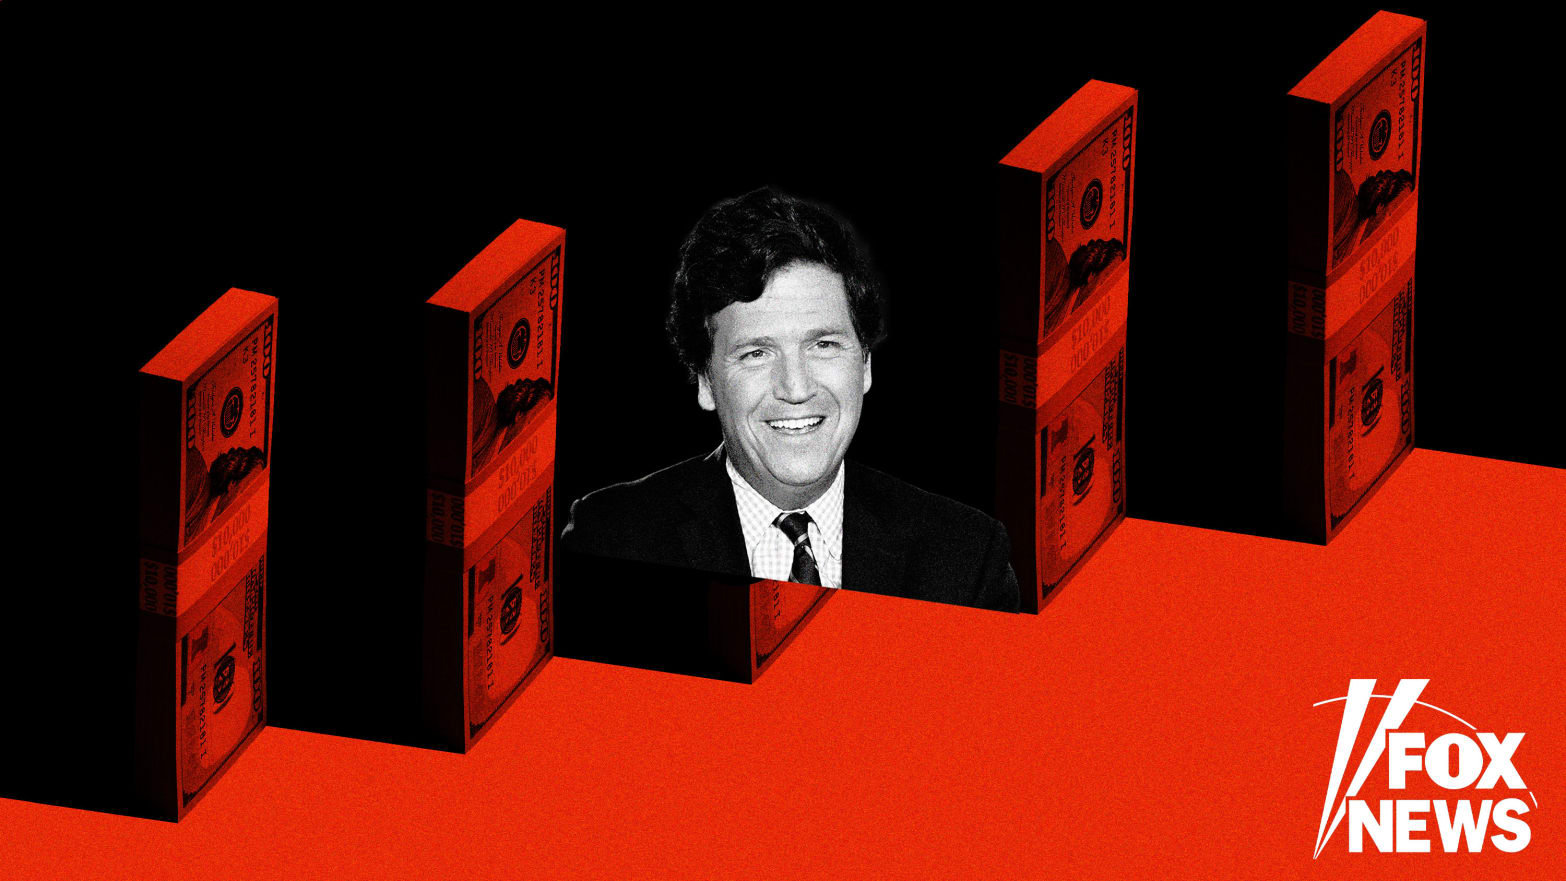 An illustration that includes images of Tucker Carlson, Money, and the Fox News logo.